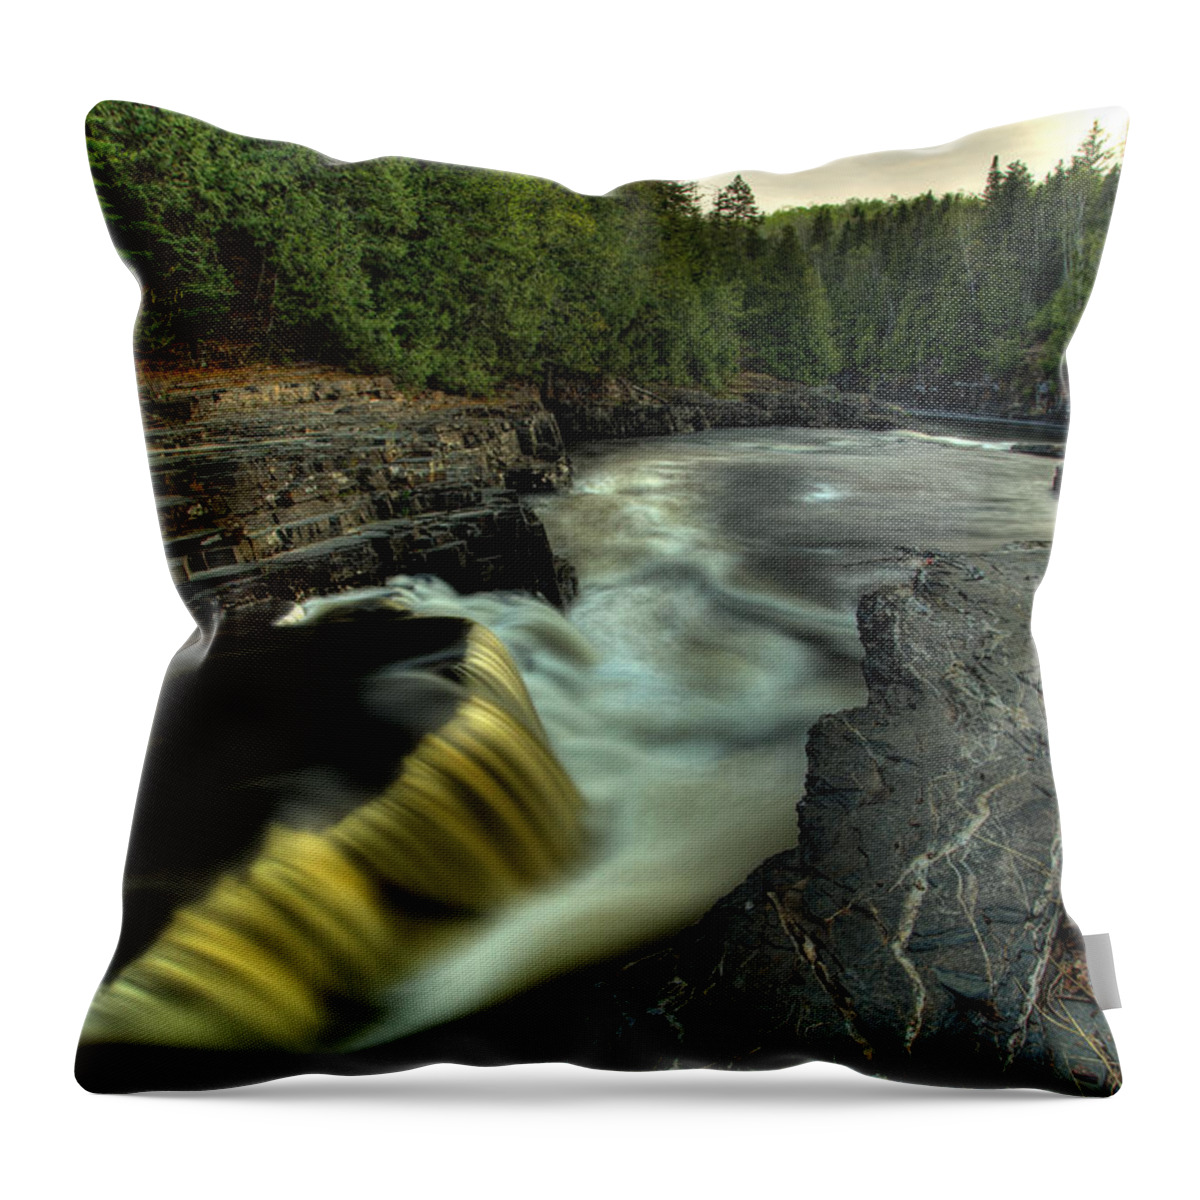 Current River Throw Pillow featuring the photograph Current River Falls by Jakub Sisak